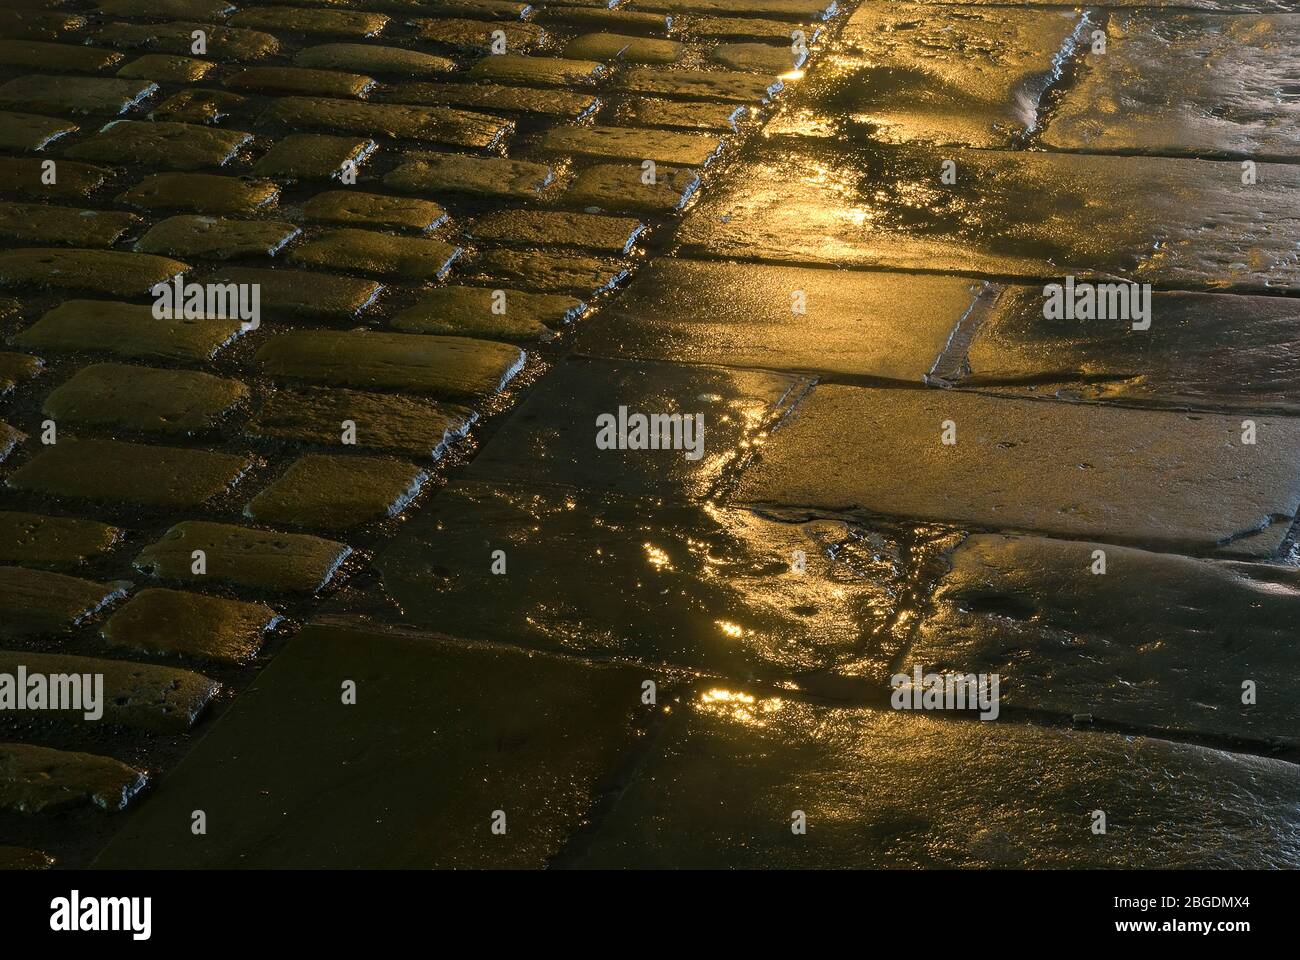 Low view of wet pavement at night showing both flagstones and smaller rounded blocks with street lighting reflected in the wetness Stock Photo